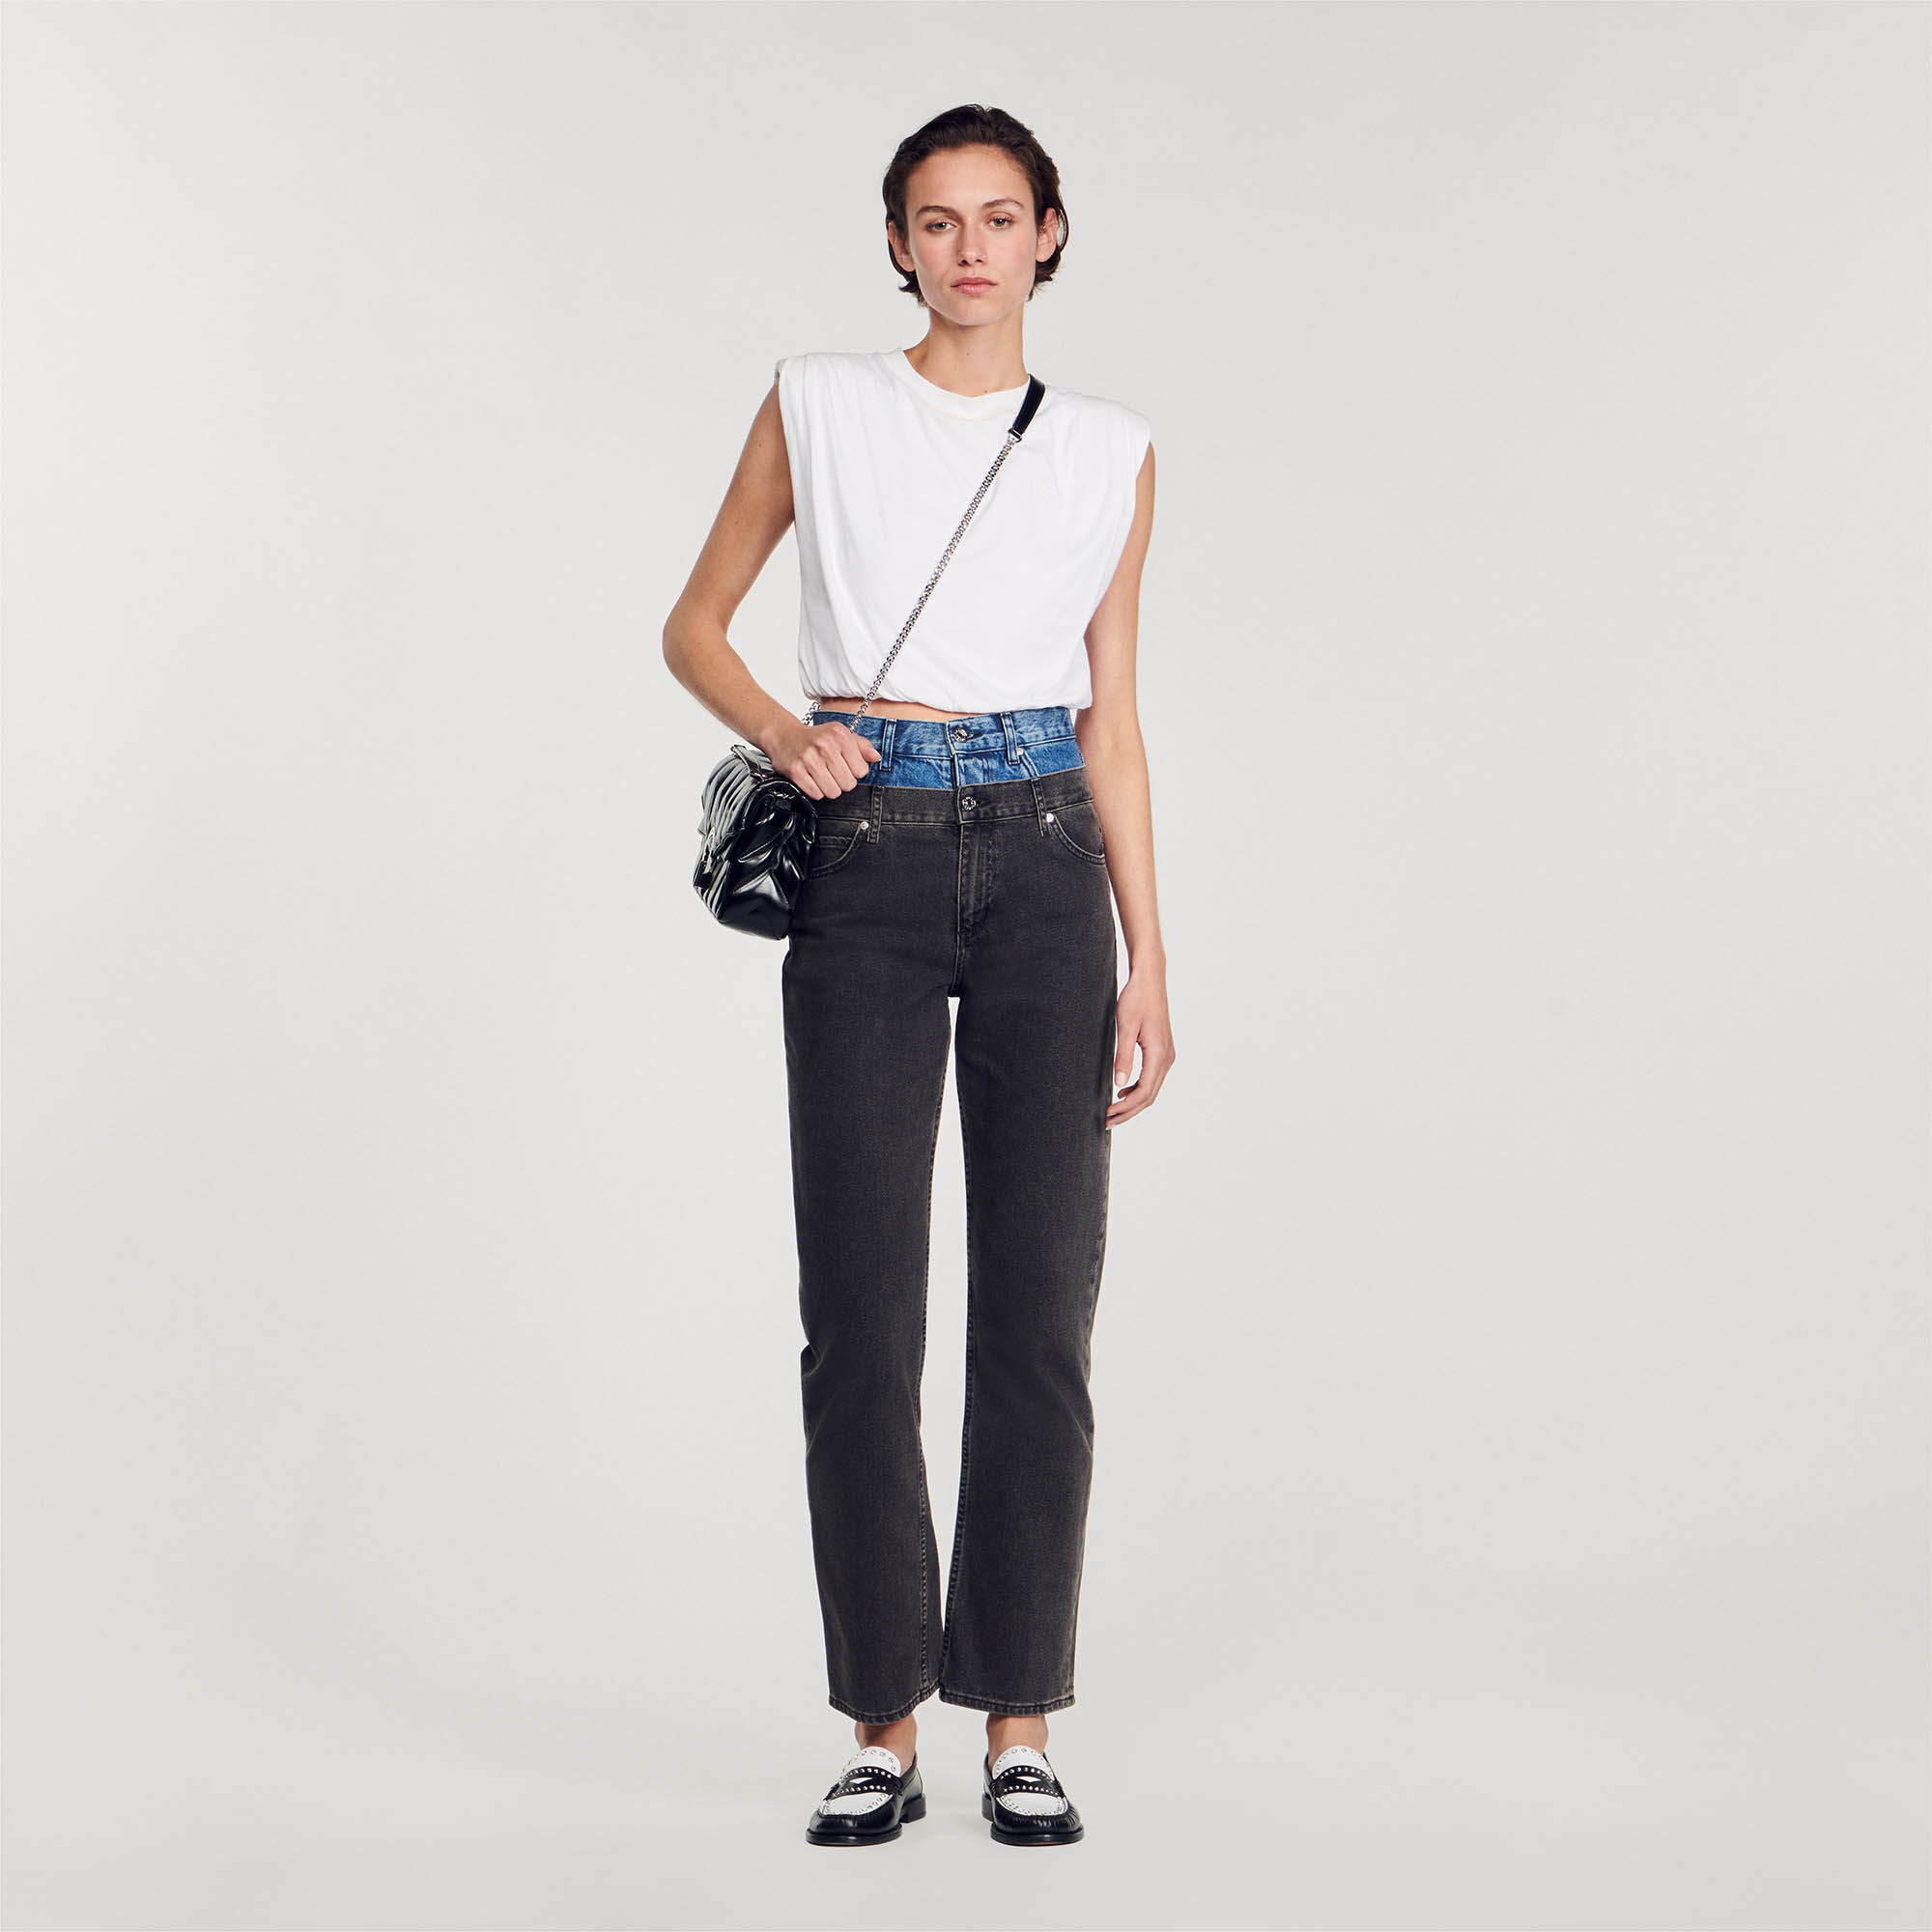 Two-tone double-waisted jeans